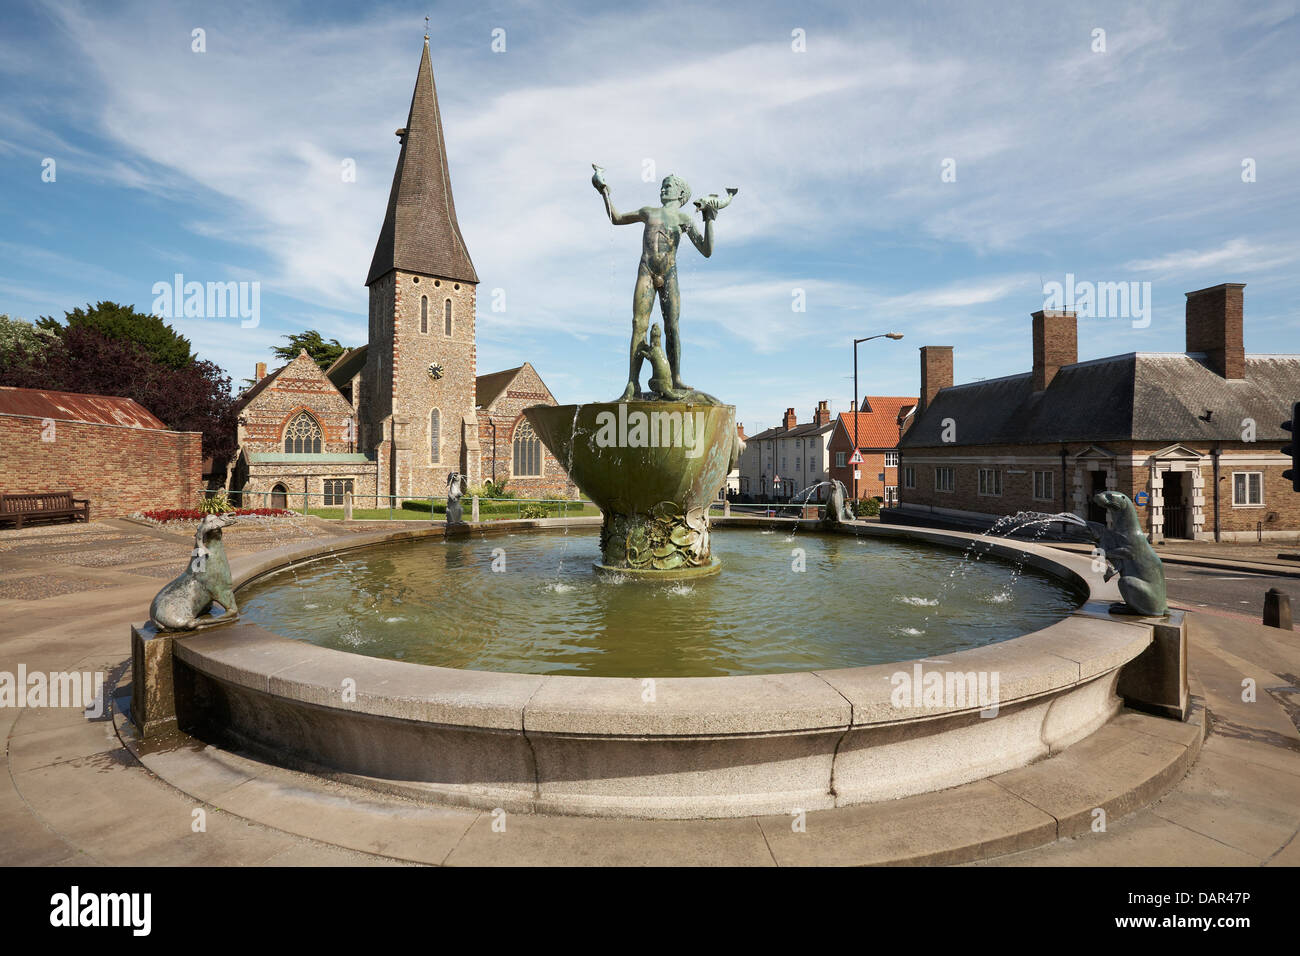 Great Britain England Essex Braintree St Michaels Church with Bronze Statue of Young Boy holding Dolphins with Sea lions around Stock Photo